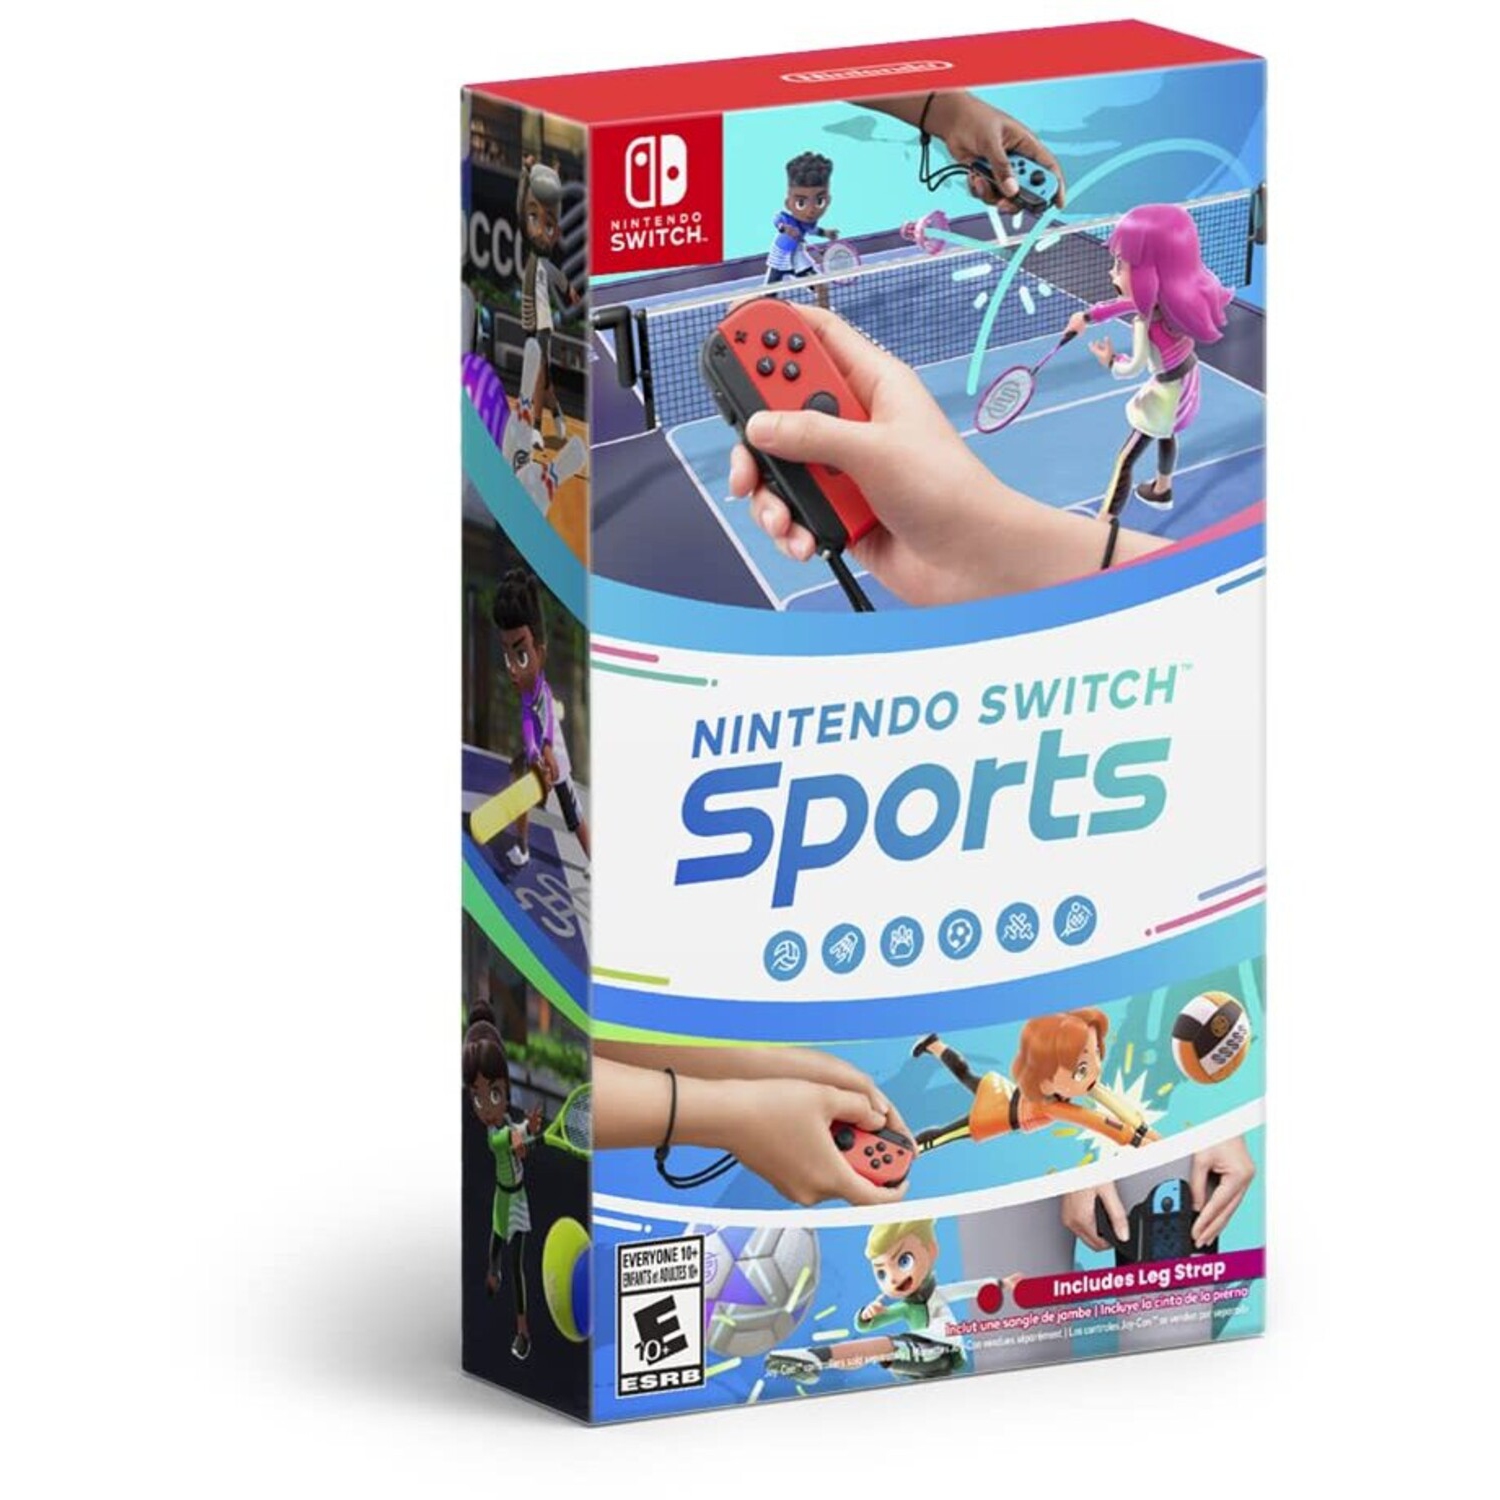 Nintendo Switch Sports for Nintendo Switch [VIDEOGAMES]